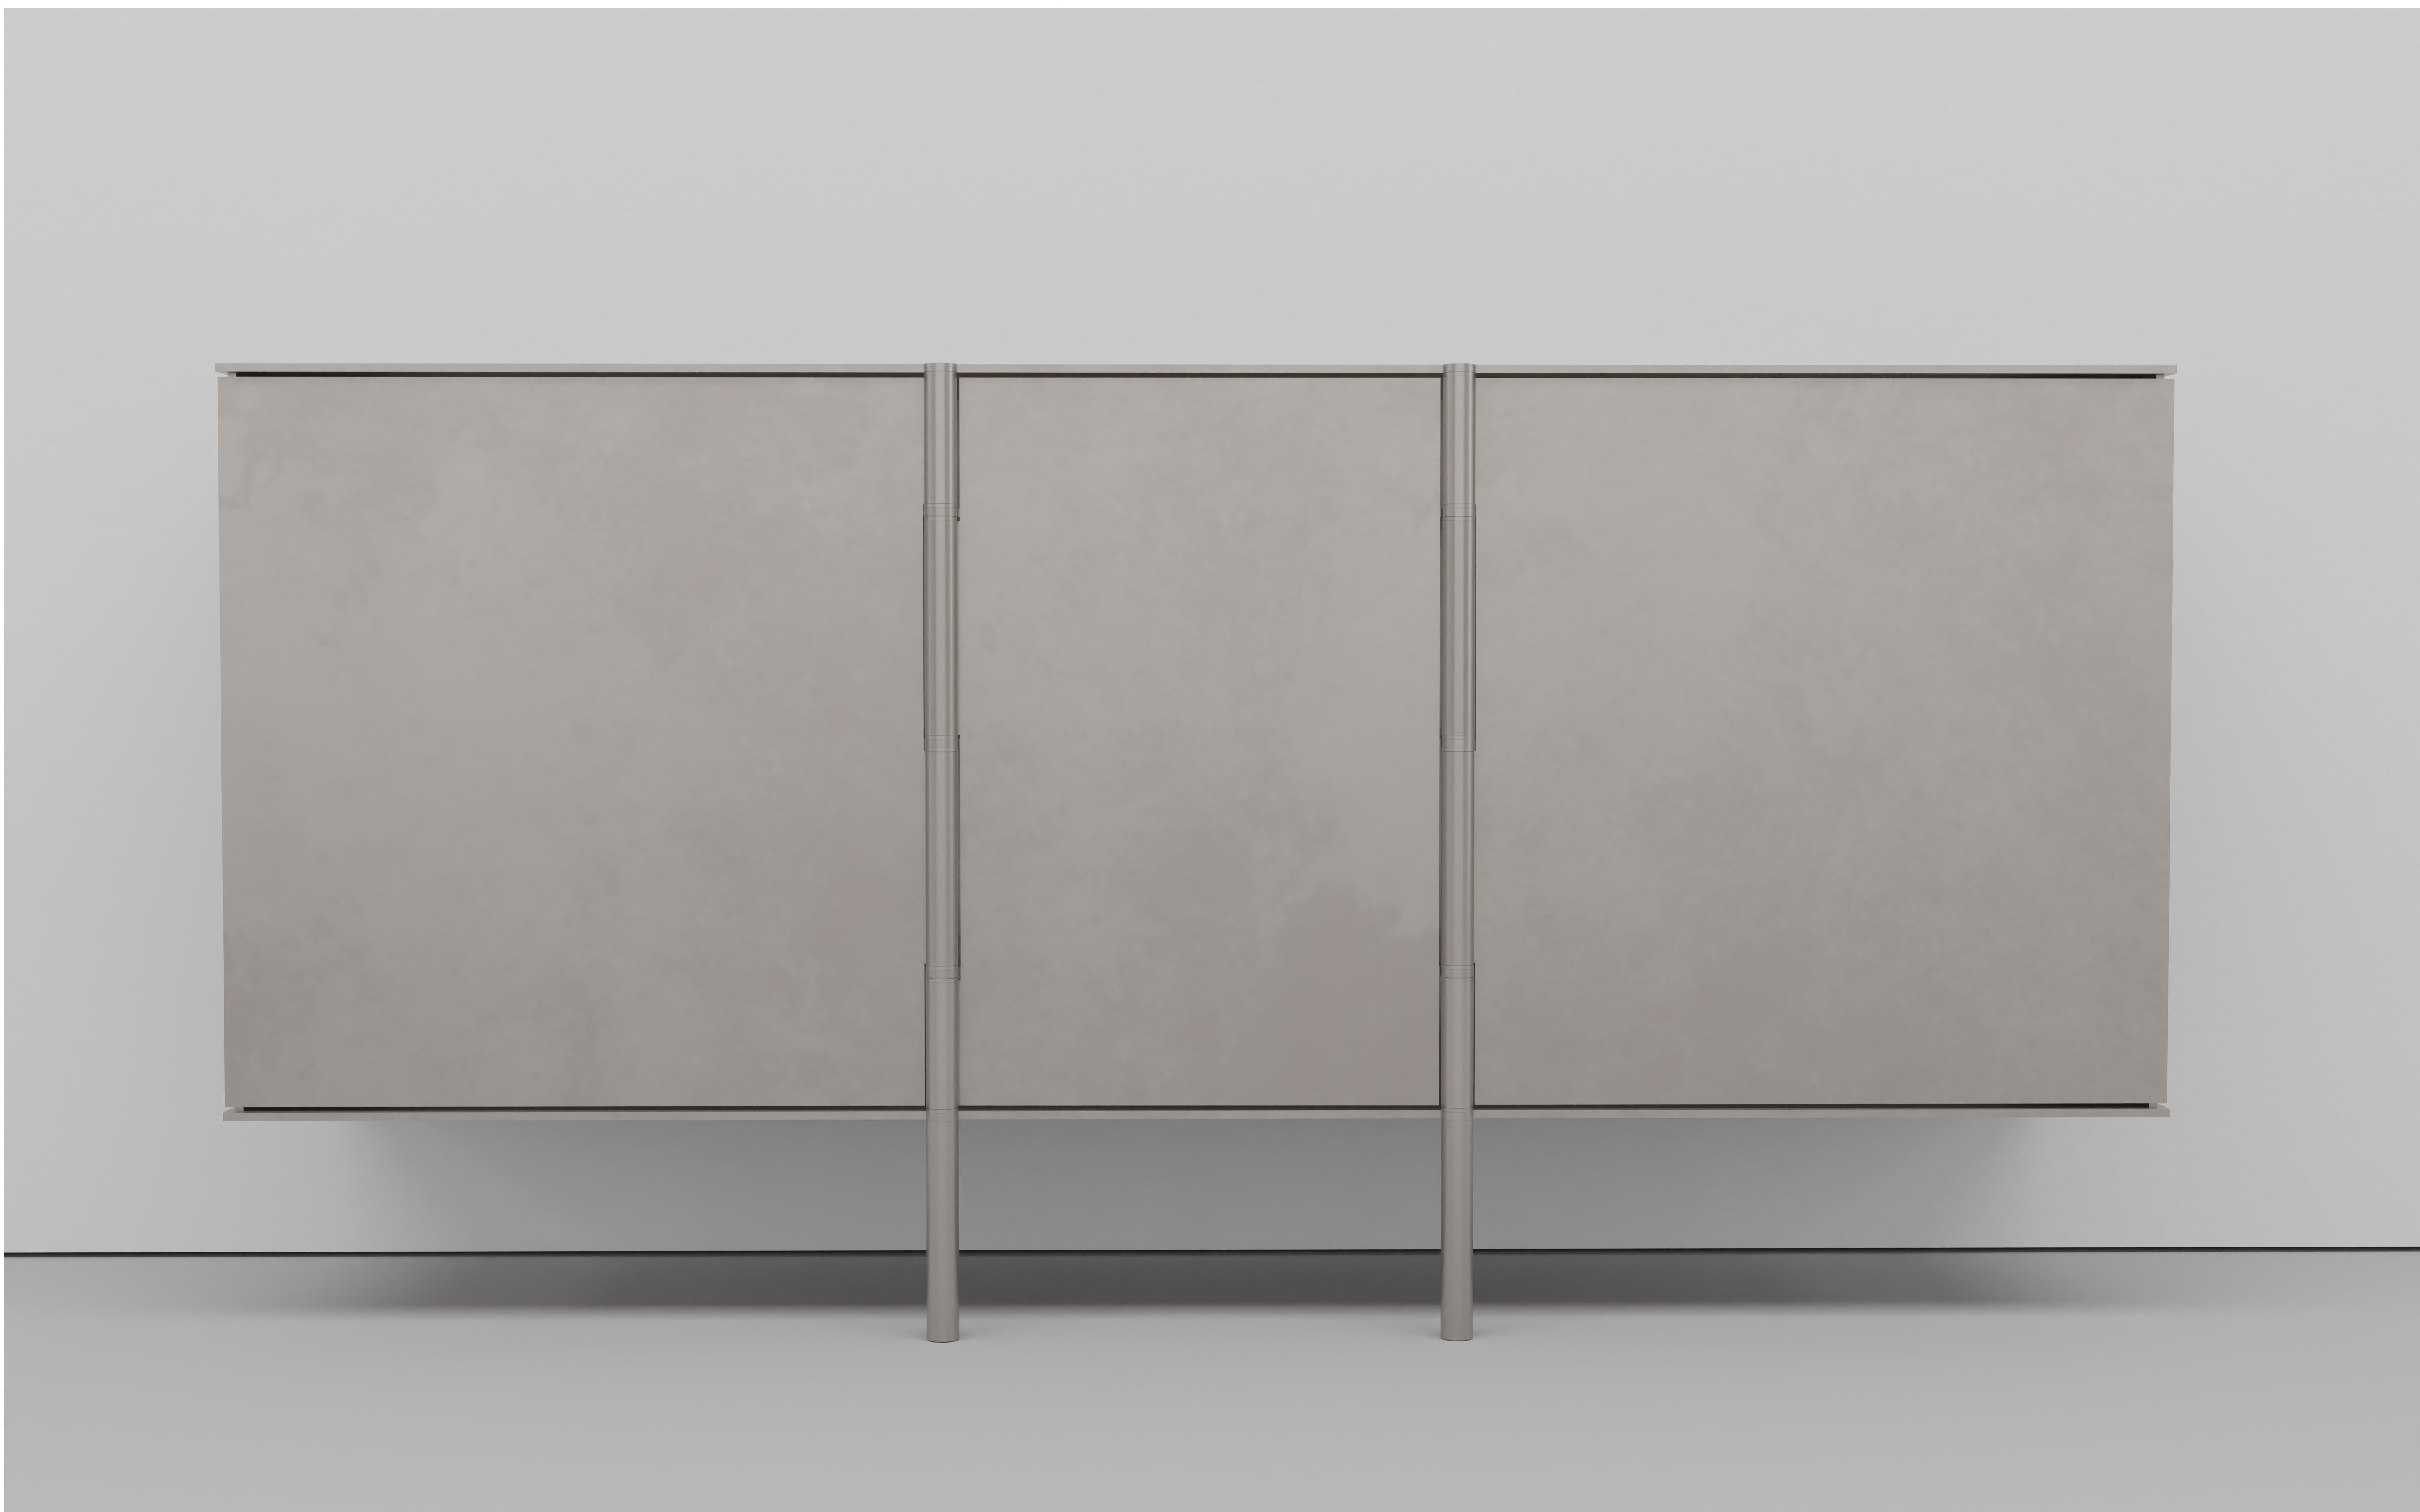 Side Board Cabinet in quarter inch thick aluminum. Made originally as storage for a New York architect's family's board game collection. The doors have custom integrated hinge that align to the interior shelves and extend to an internal foot leveler